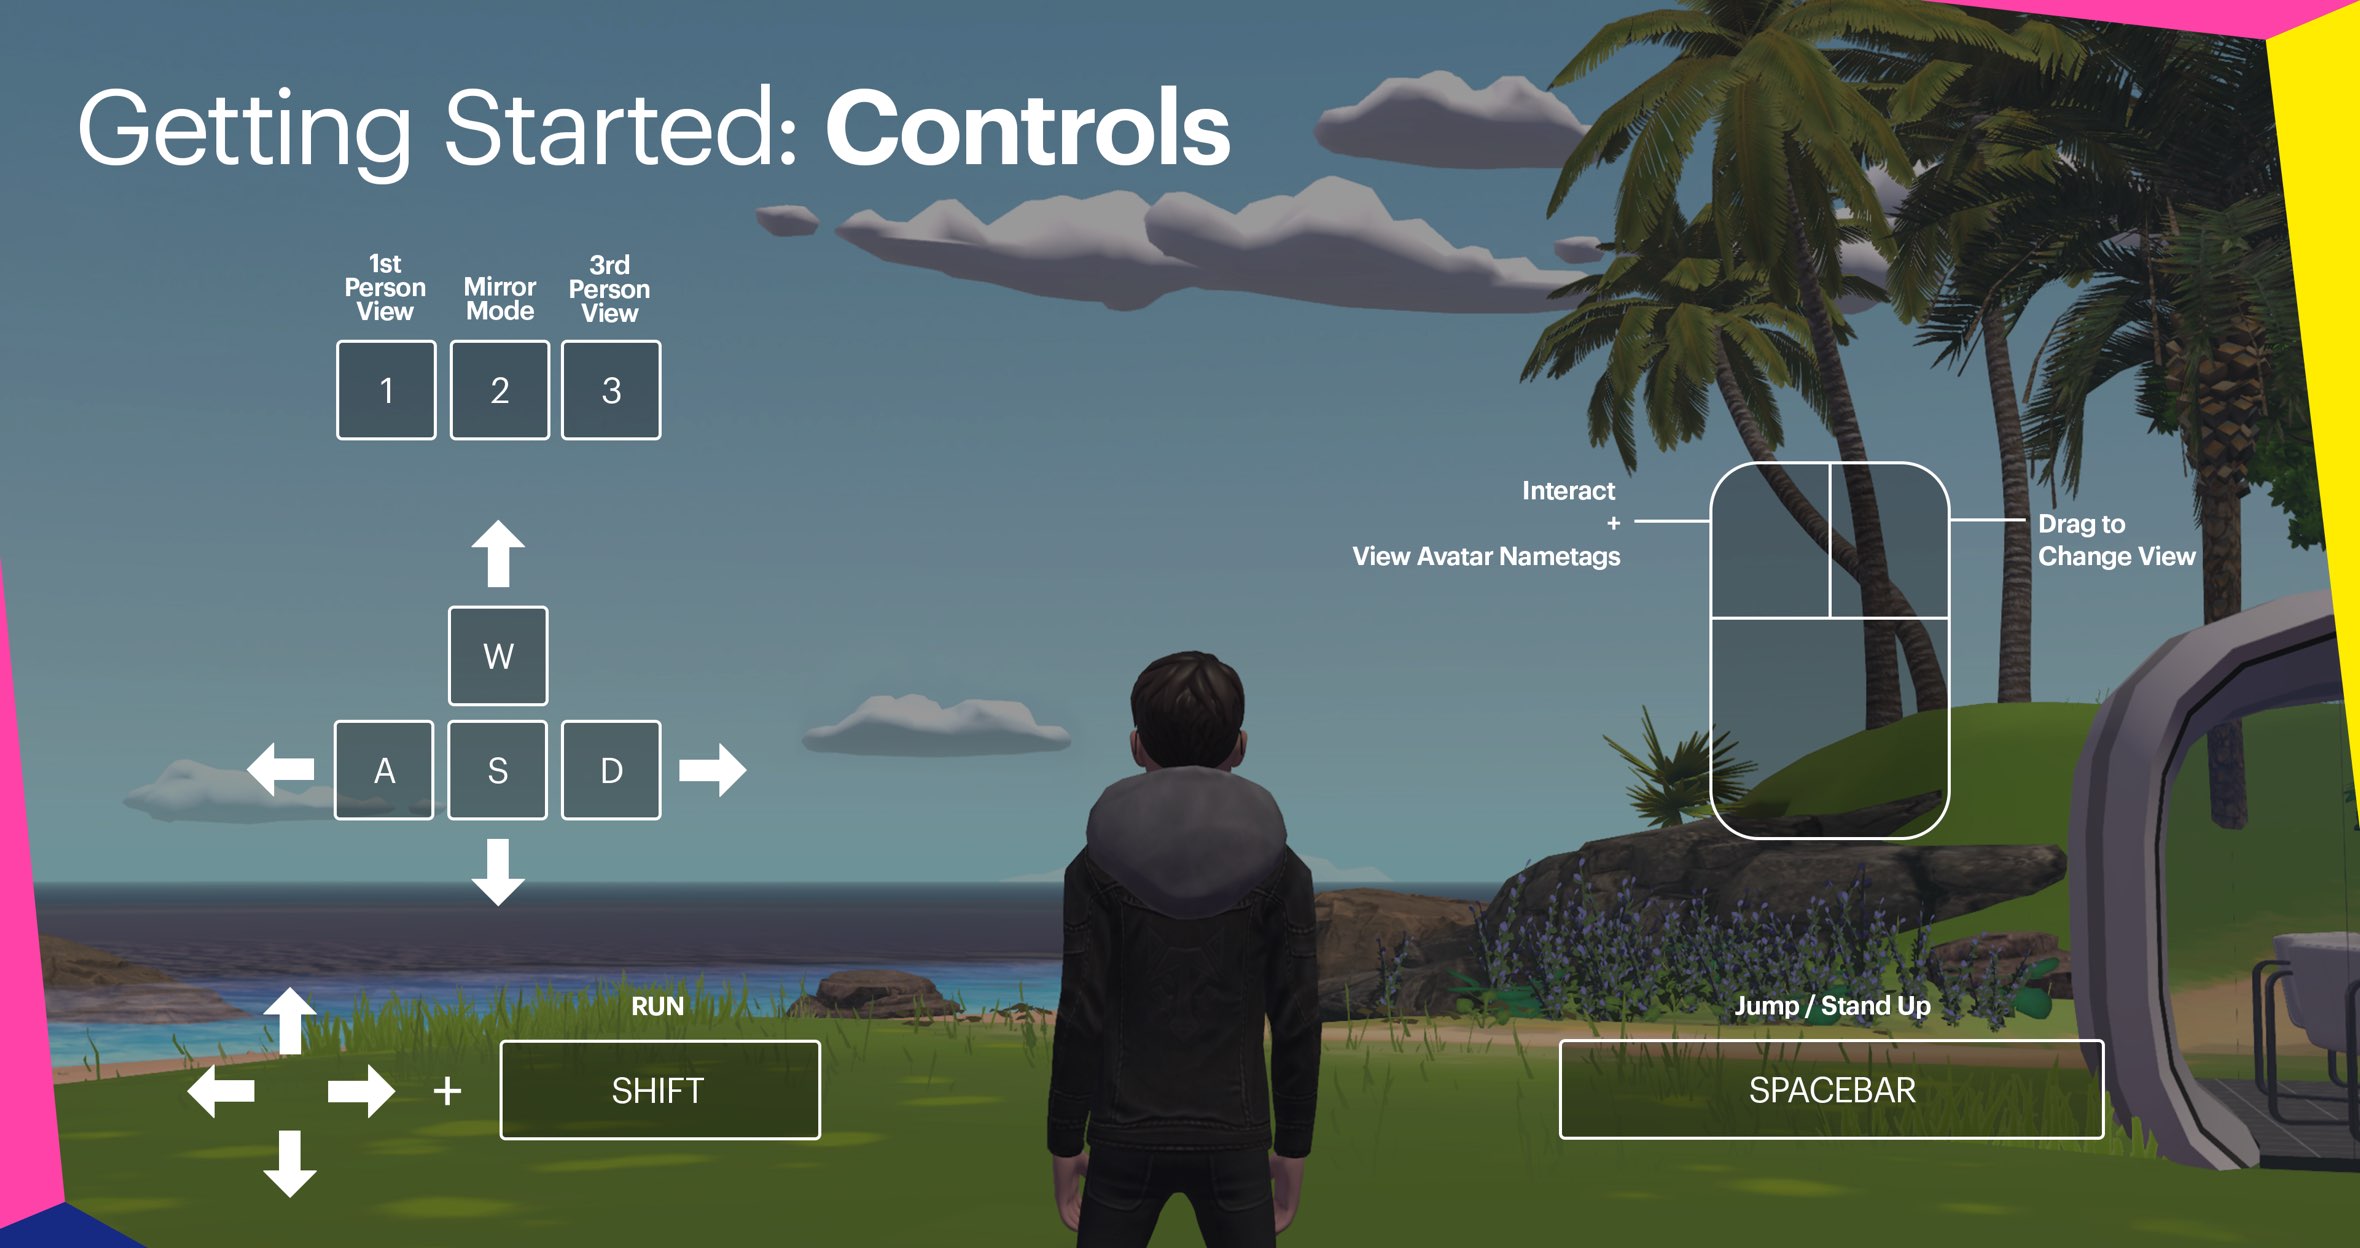 Controls overlay design for High Fidelity UI